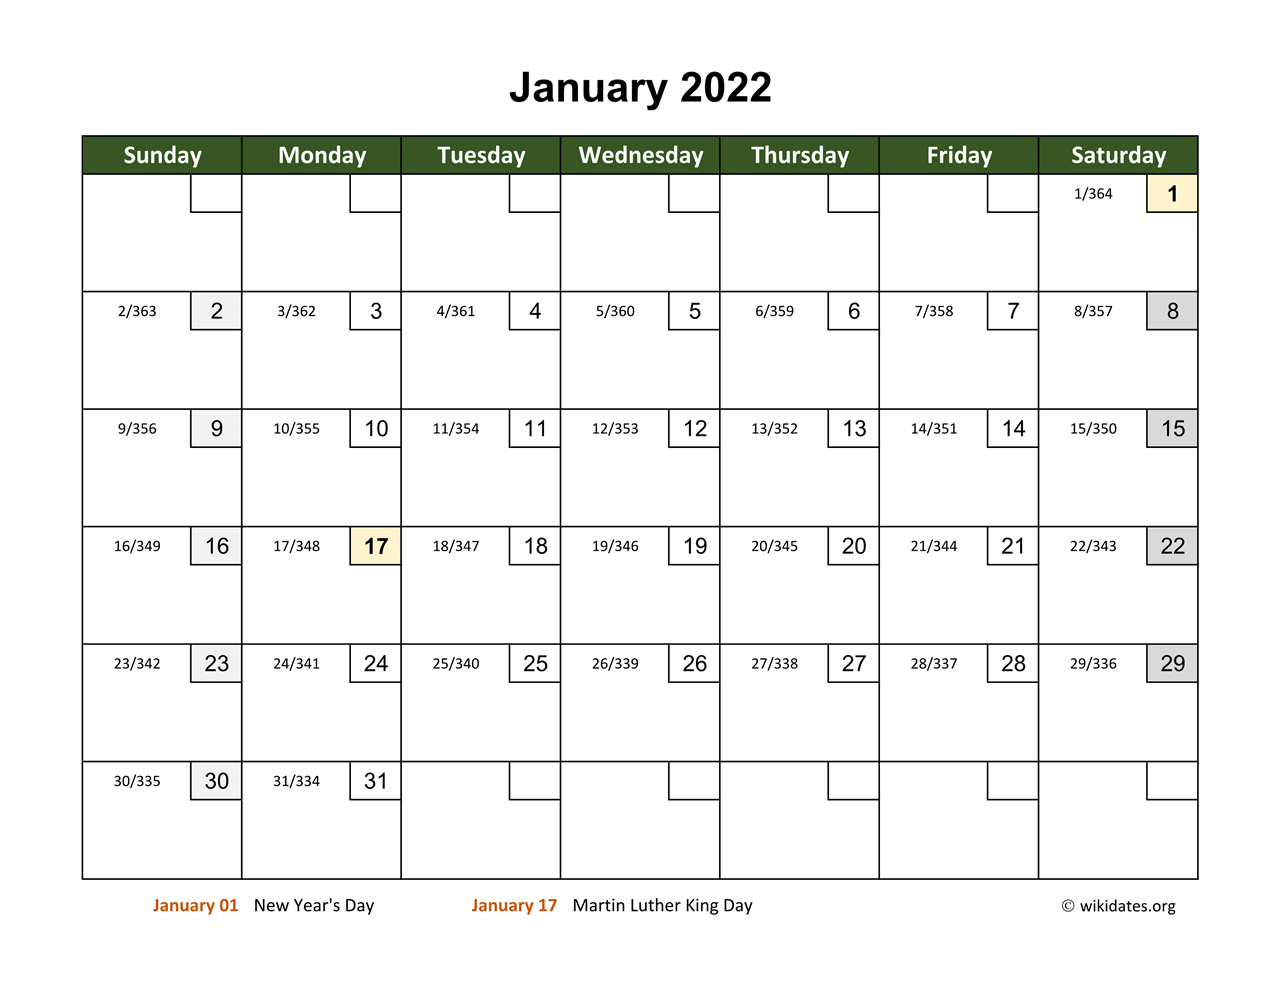 Days Calendar 2022 Monthly 2022 Calendar With Day Numbers | Wikidates.org